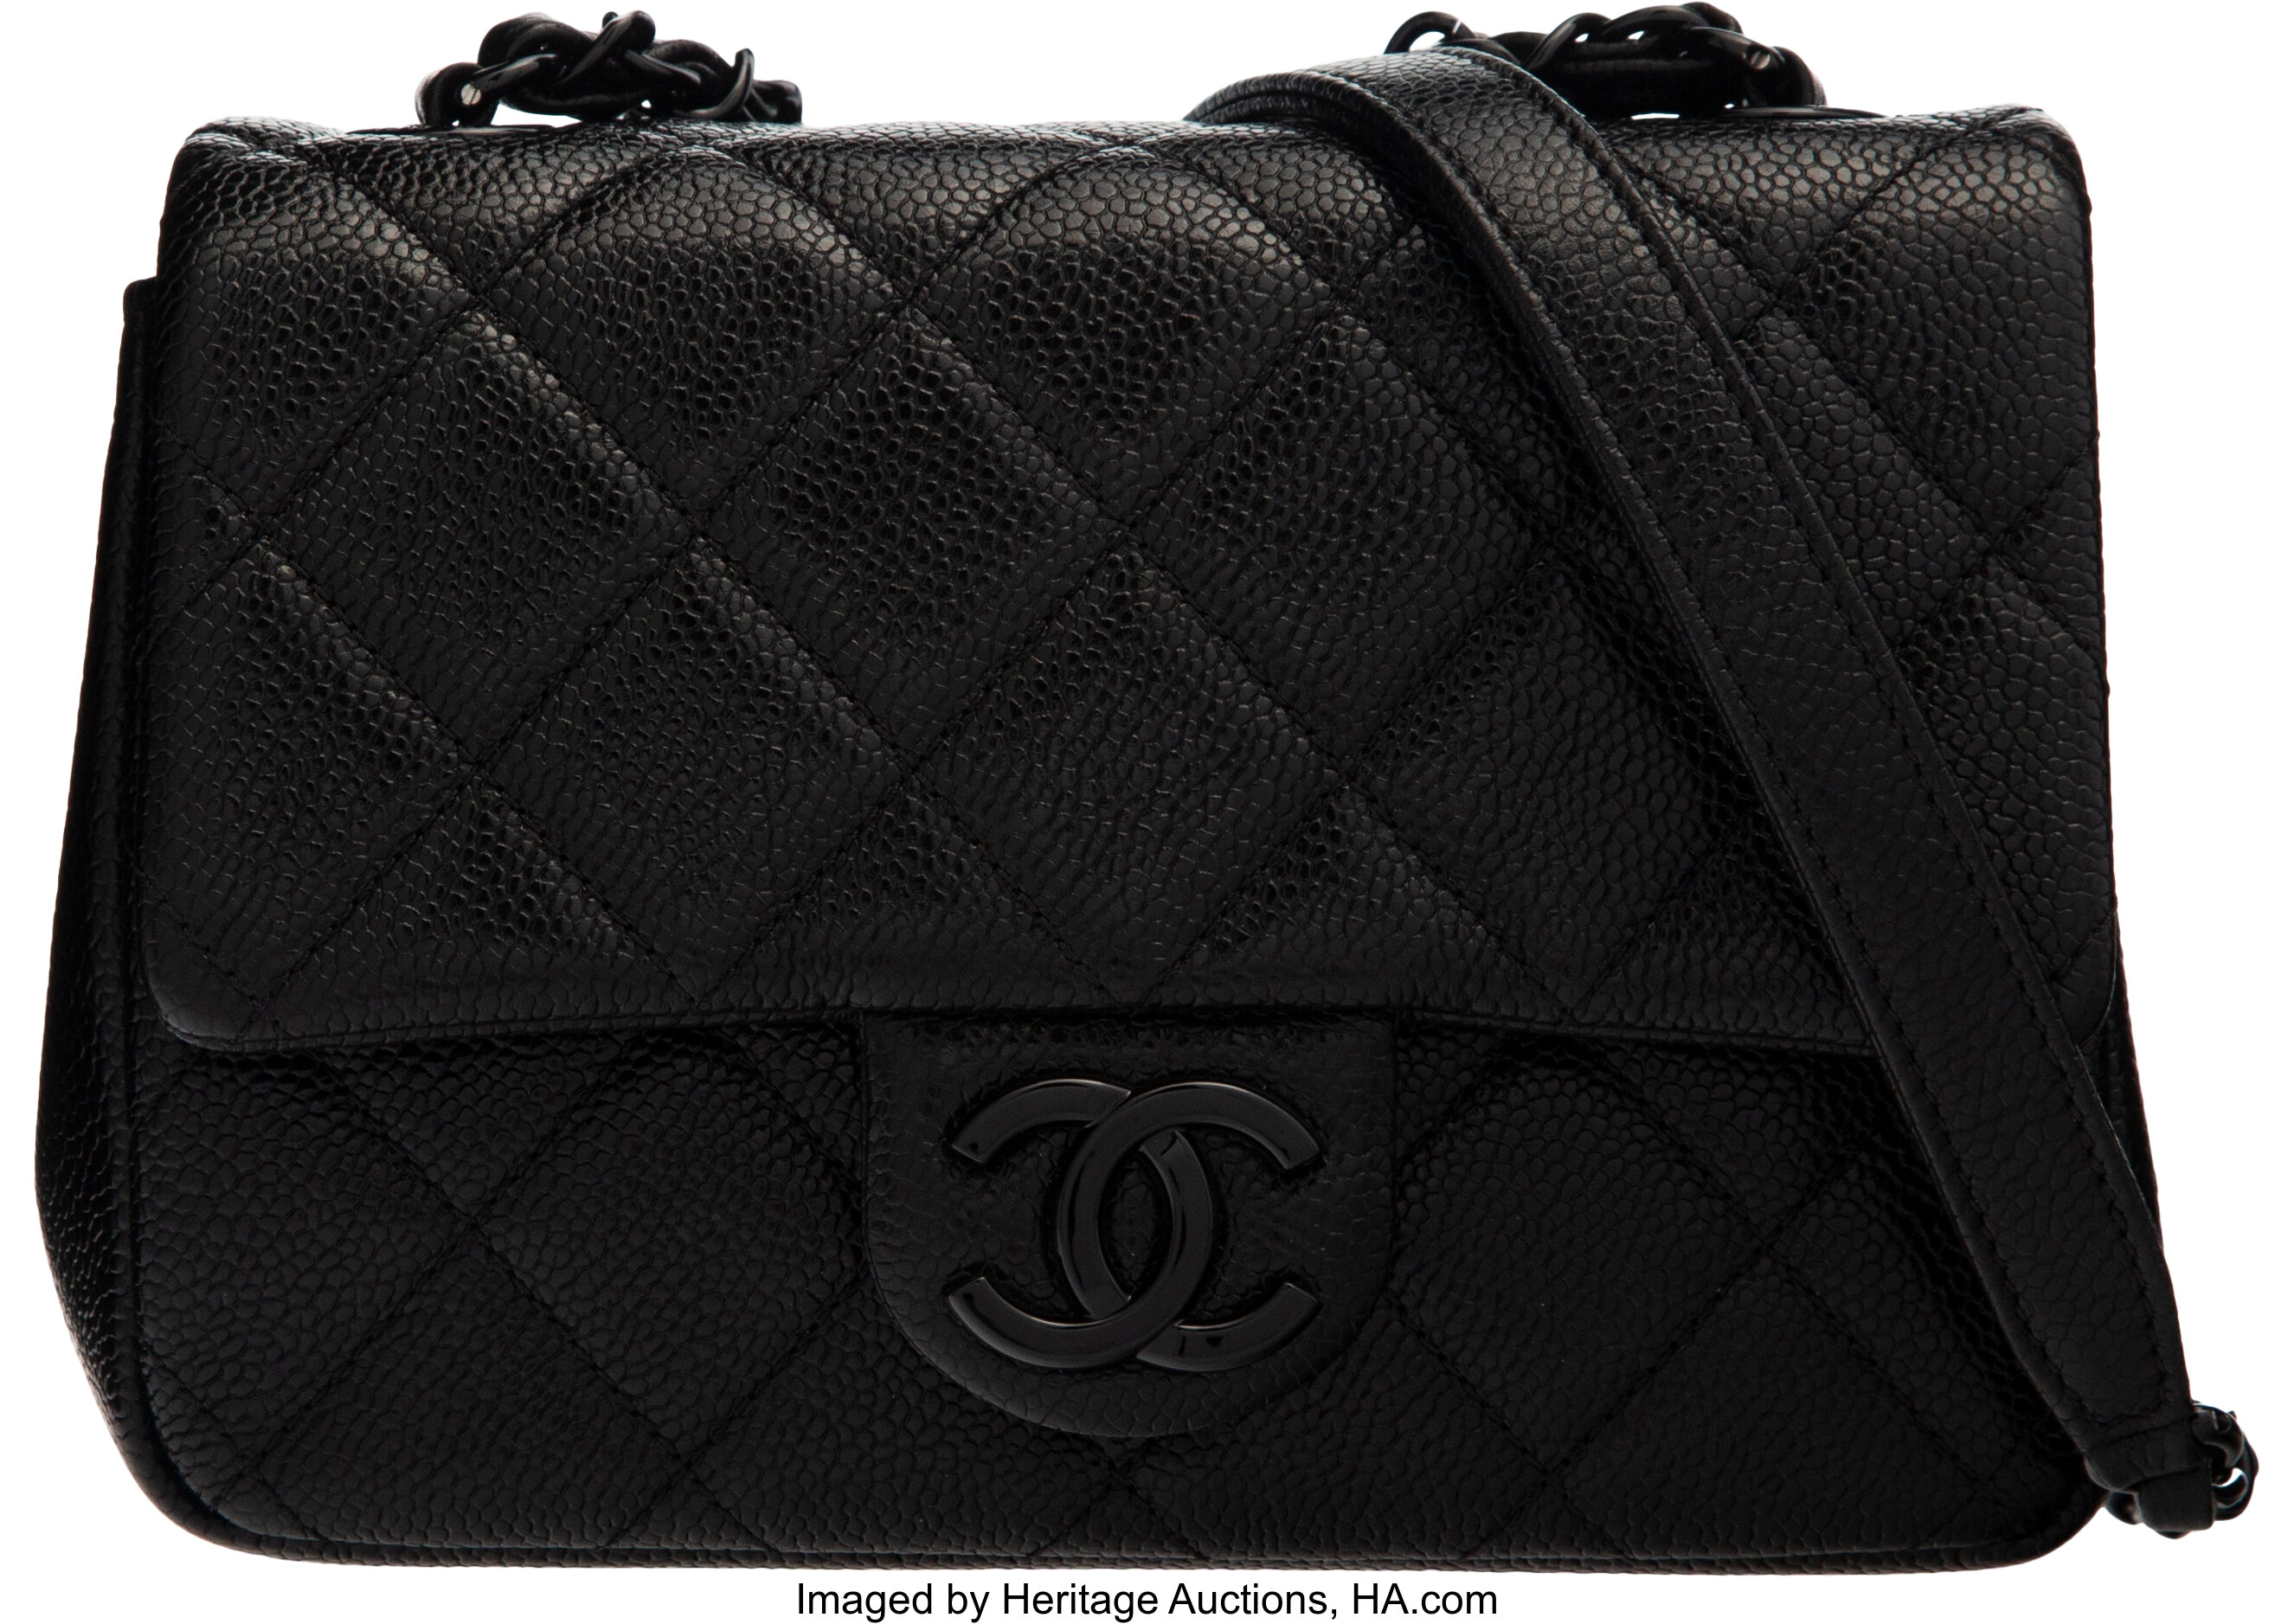 chanel mini with top handle